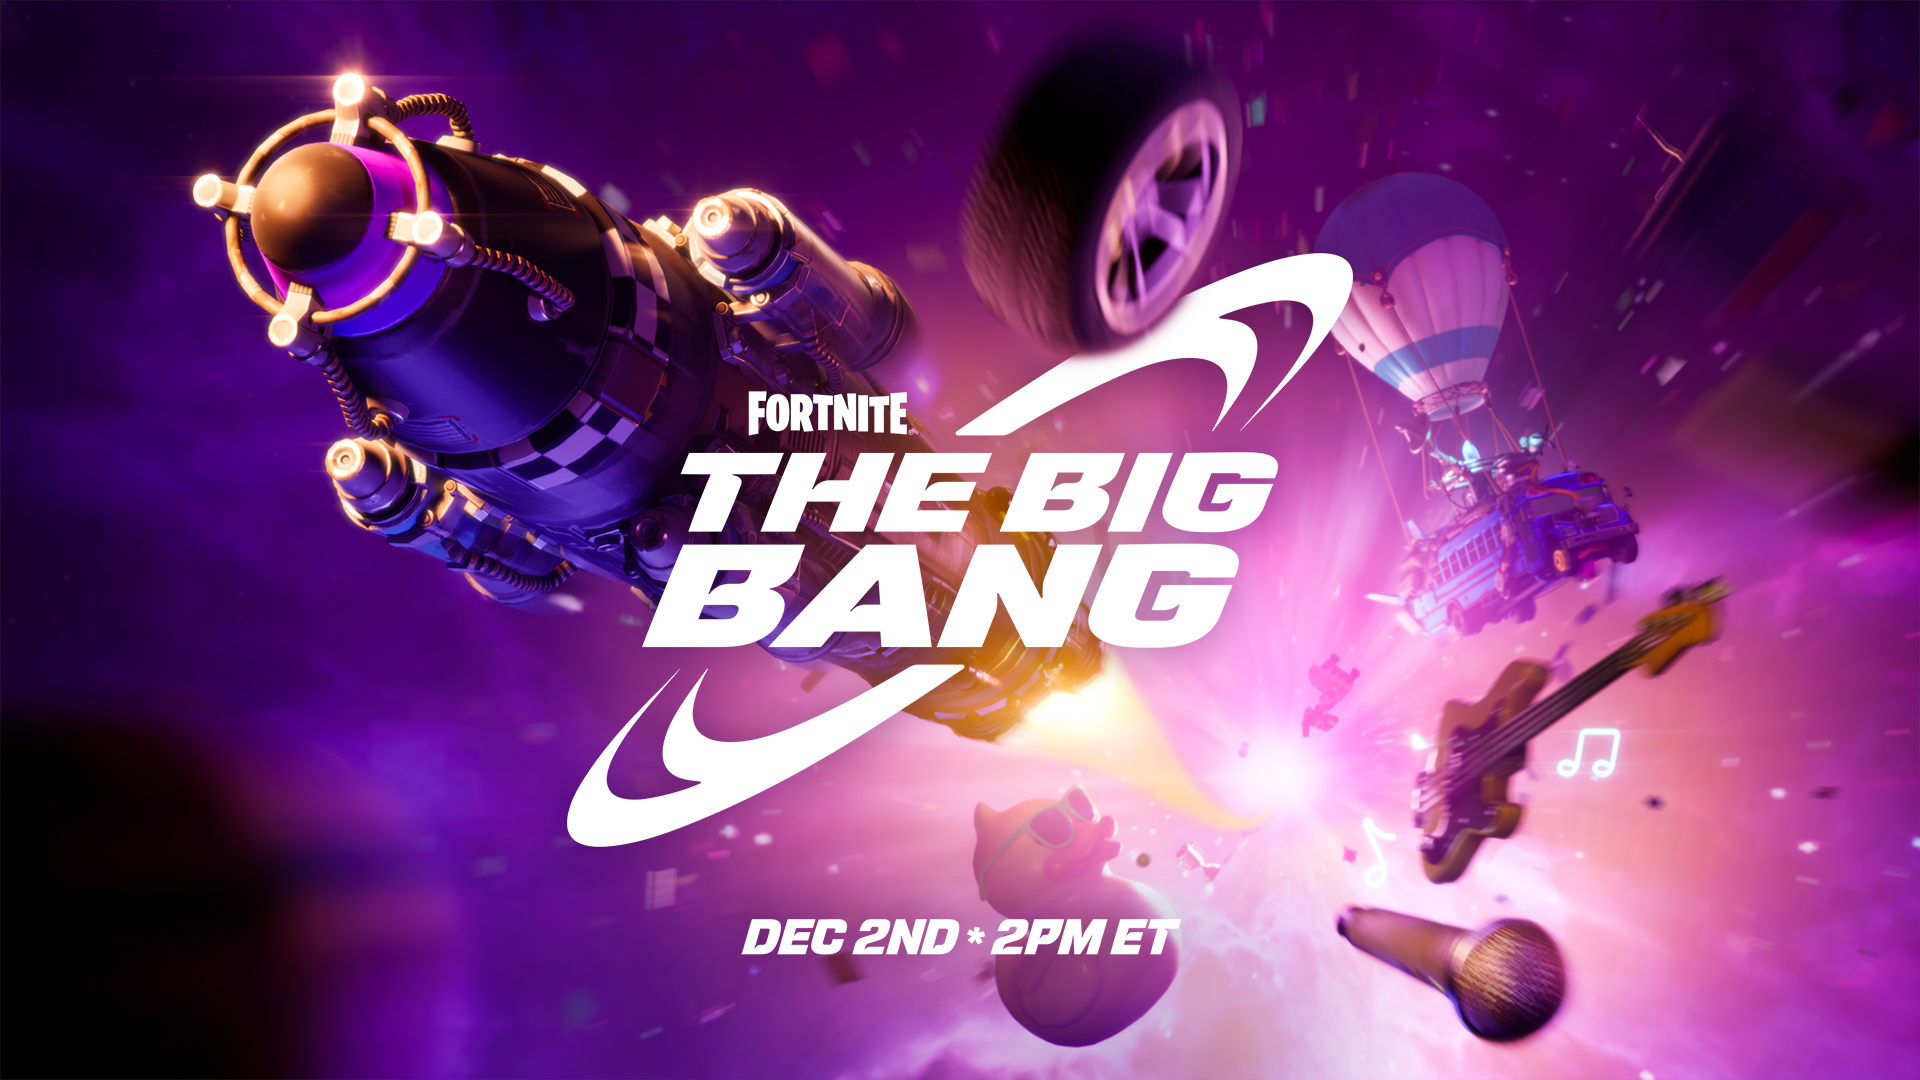 Art showing a rocket, a Fortnite bus, a wheel, a guitar, and a microphone, flying out of a purple void. Text reads “Fortnite: The Big Bang - Dec 2nd, 2PM ET”